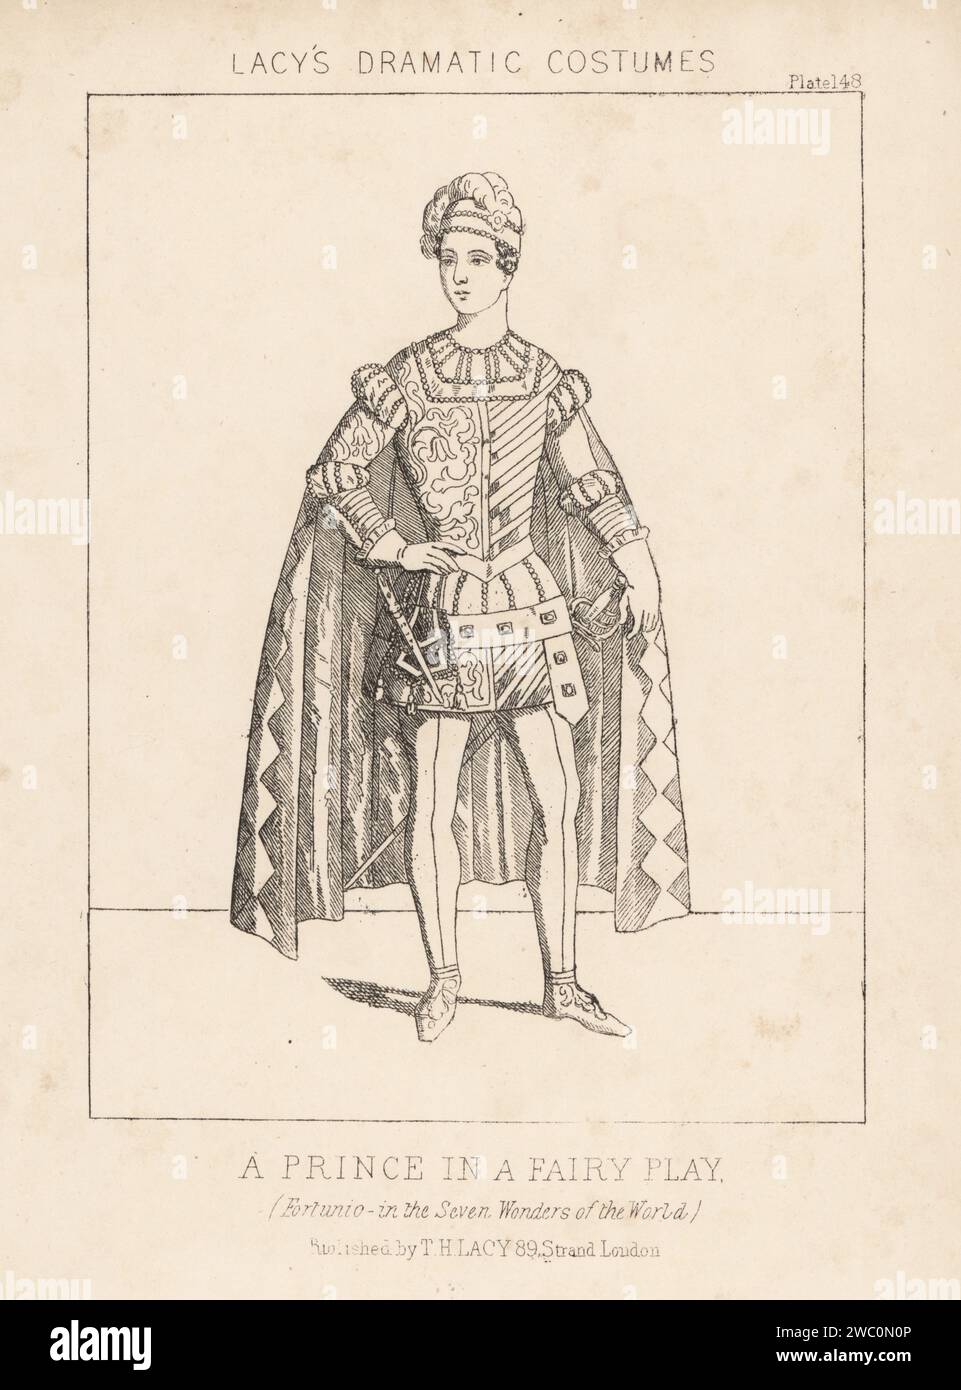 Adolphe Paert as Fortunio in Les Sept Merveilles du Monde at La Porte St. Martin. The Seven Wonders of the World was a great fairy spectacle by Adolphe d'Ennery with music and ballet by Gondois. Prince in a fairy play in long cape, armorial surcoat, hose. Lithograph from Thomas Hailes Lacy's Male Costumes, Historical, National and Dramatic in 200 Plates, London, 1865. Lacy (1809-1873) was a British actor, playwright, theatrical manager and publisher. Stock Photo